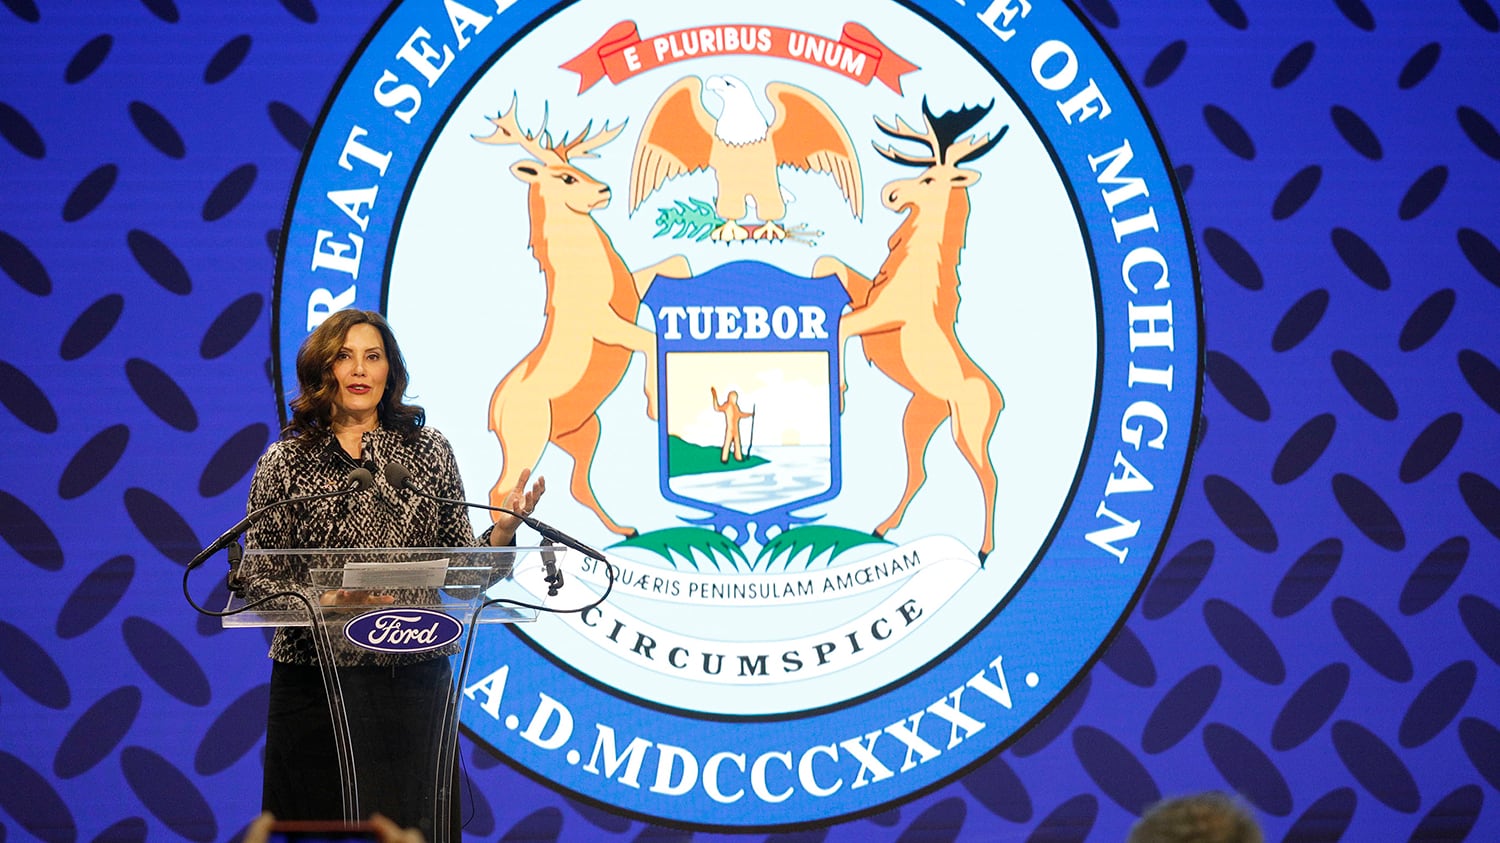 A woman wearing a dark top and a black skirt stands at a podium in front of a large Michigan state seal.